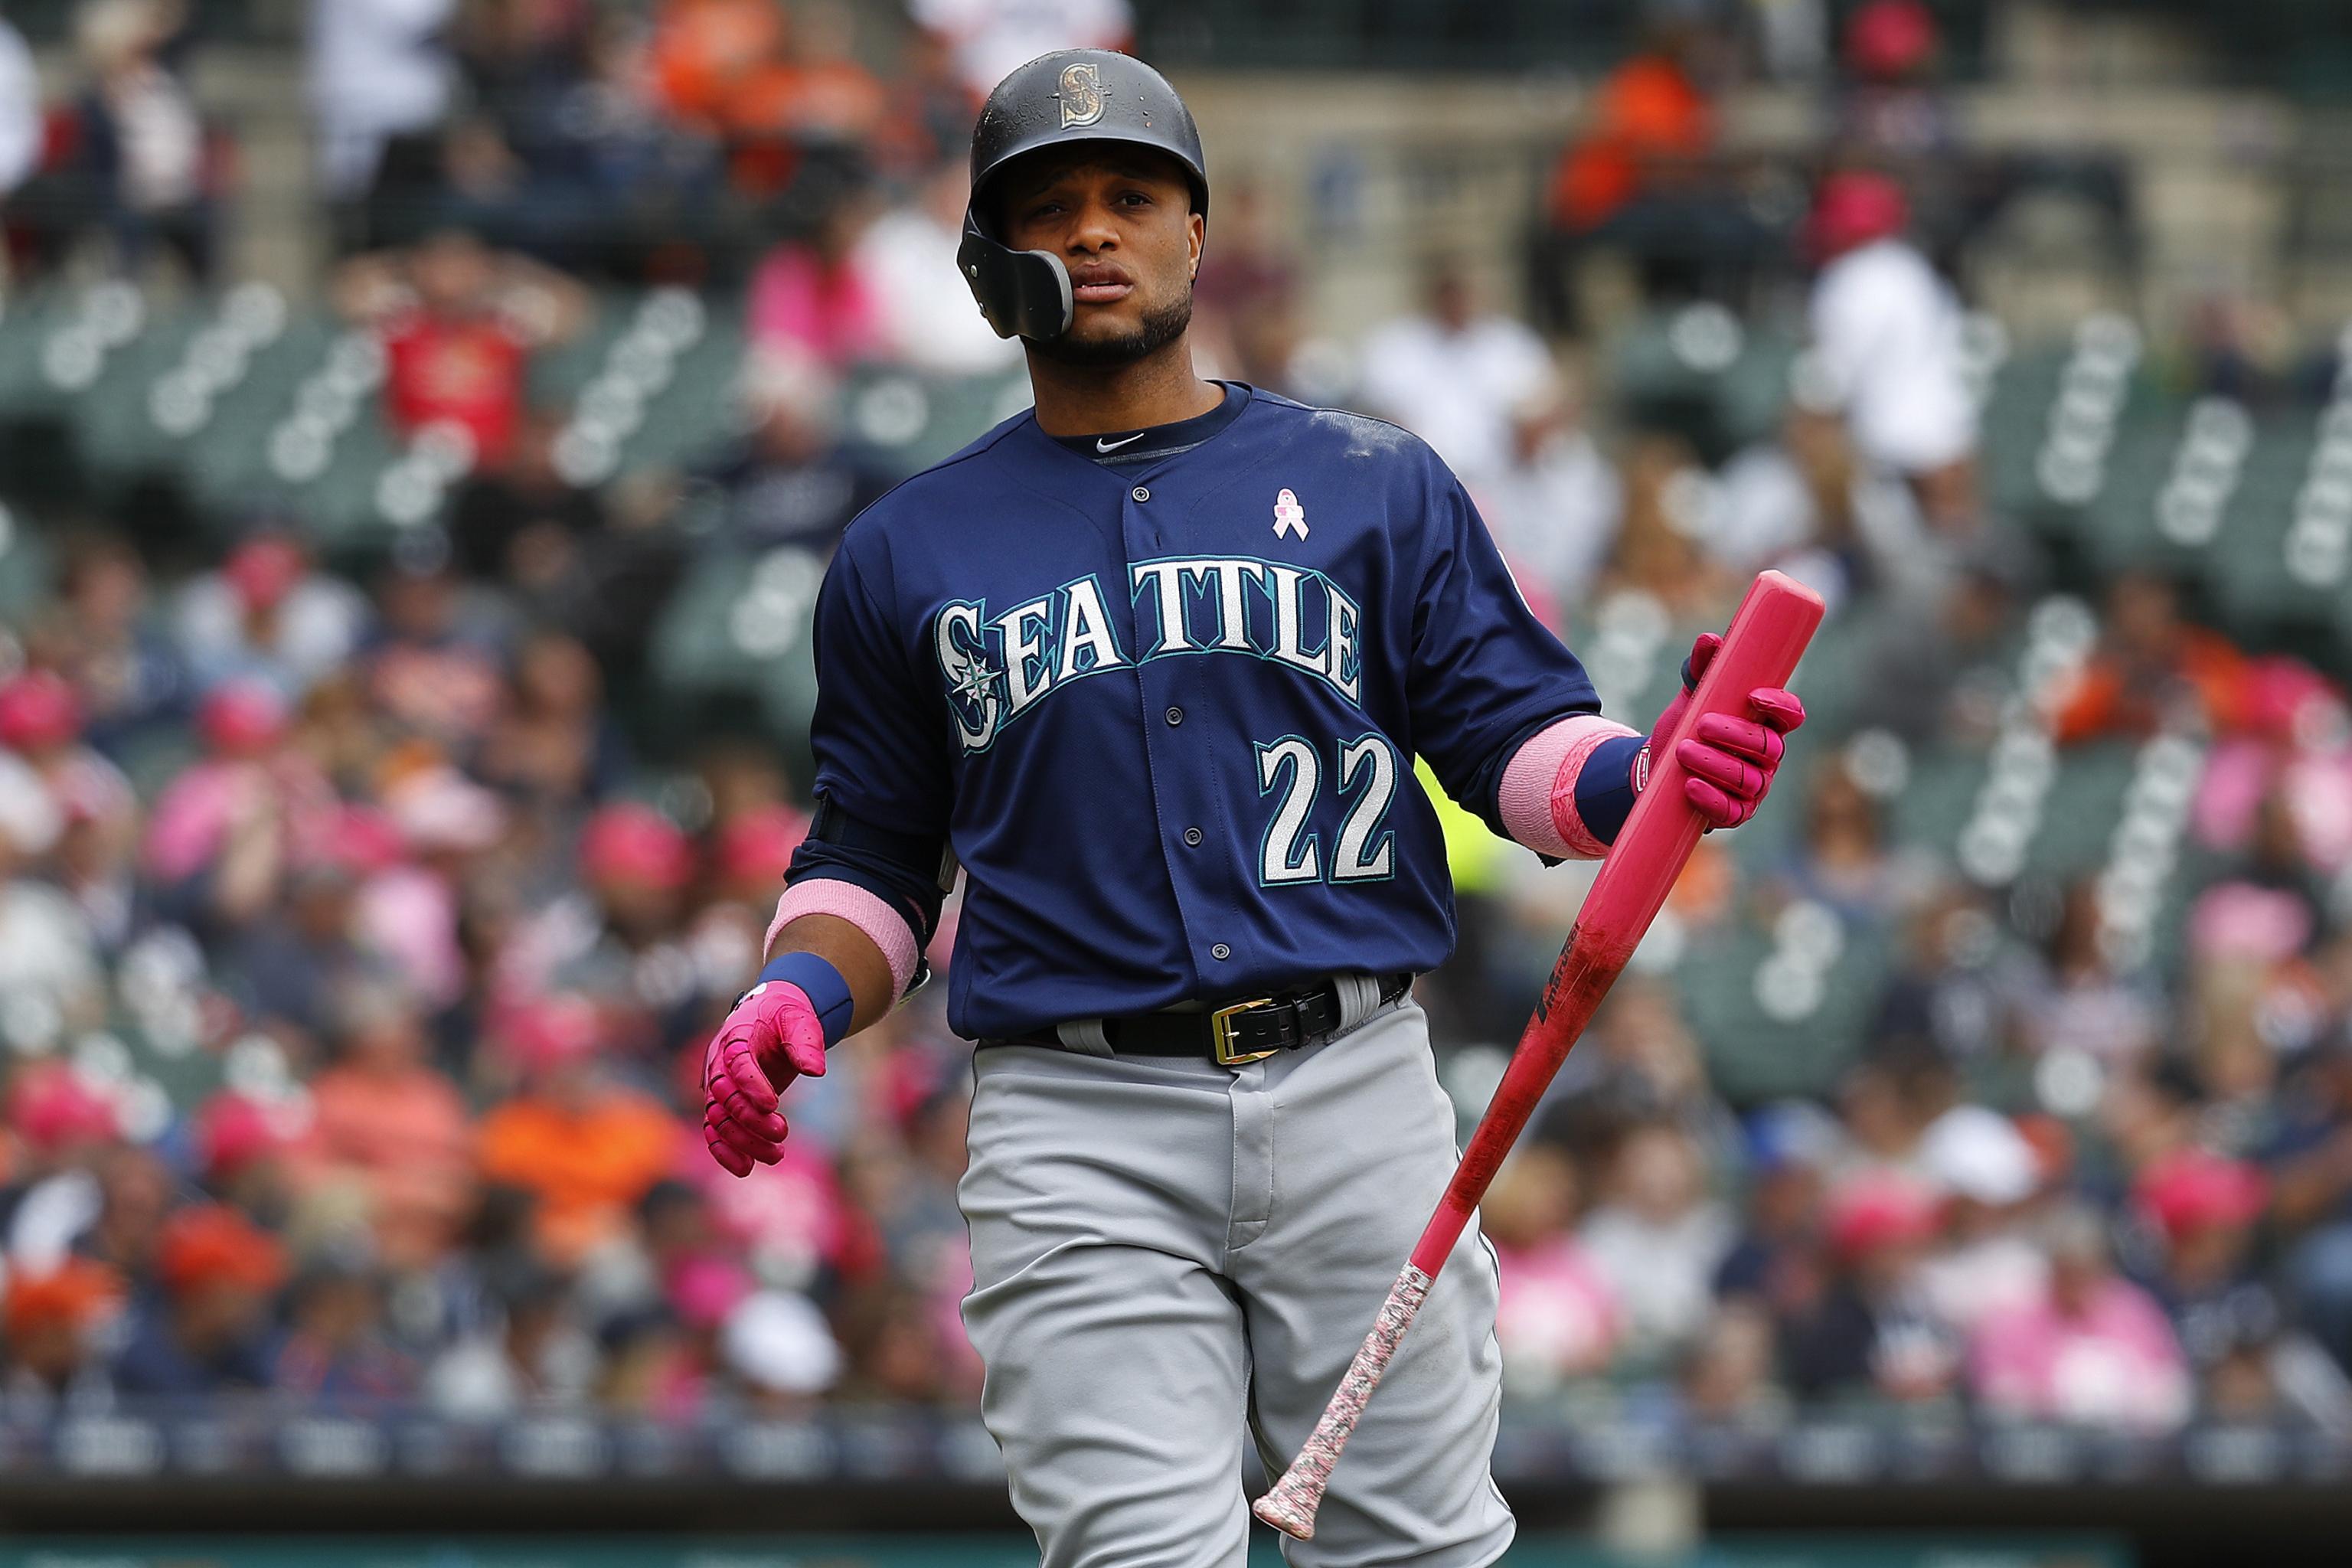 Robinson Cano Net Worth and the real reason why he was suspended